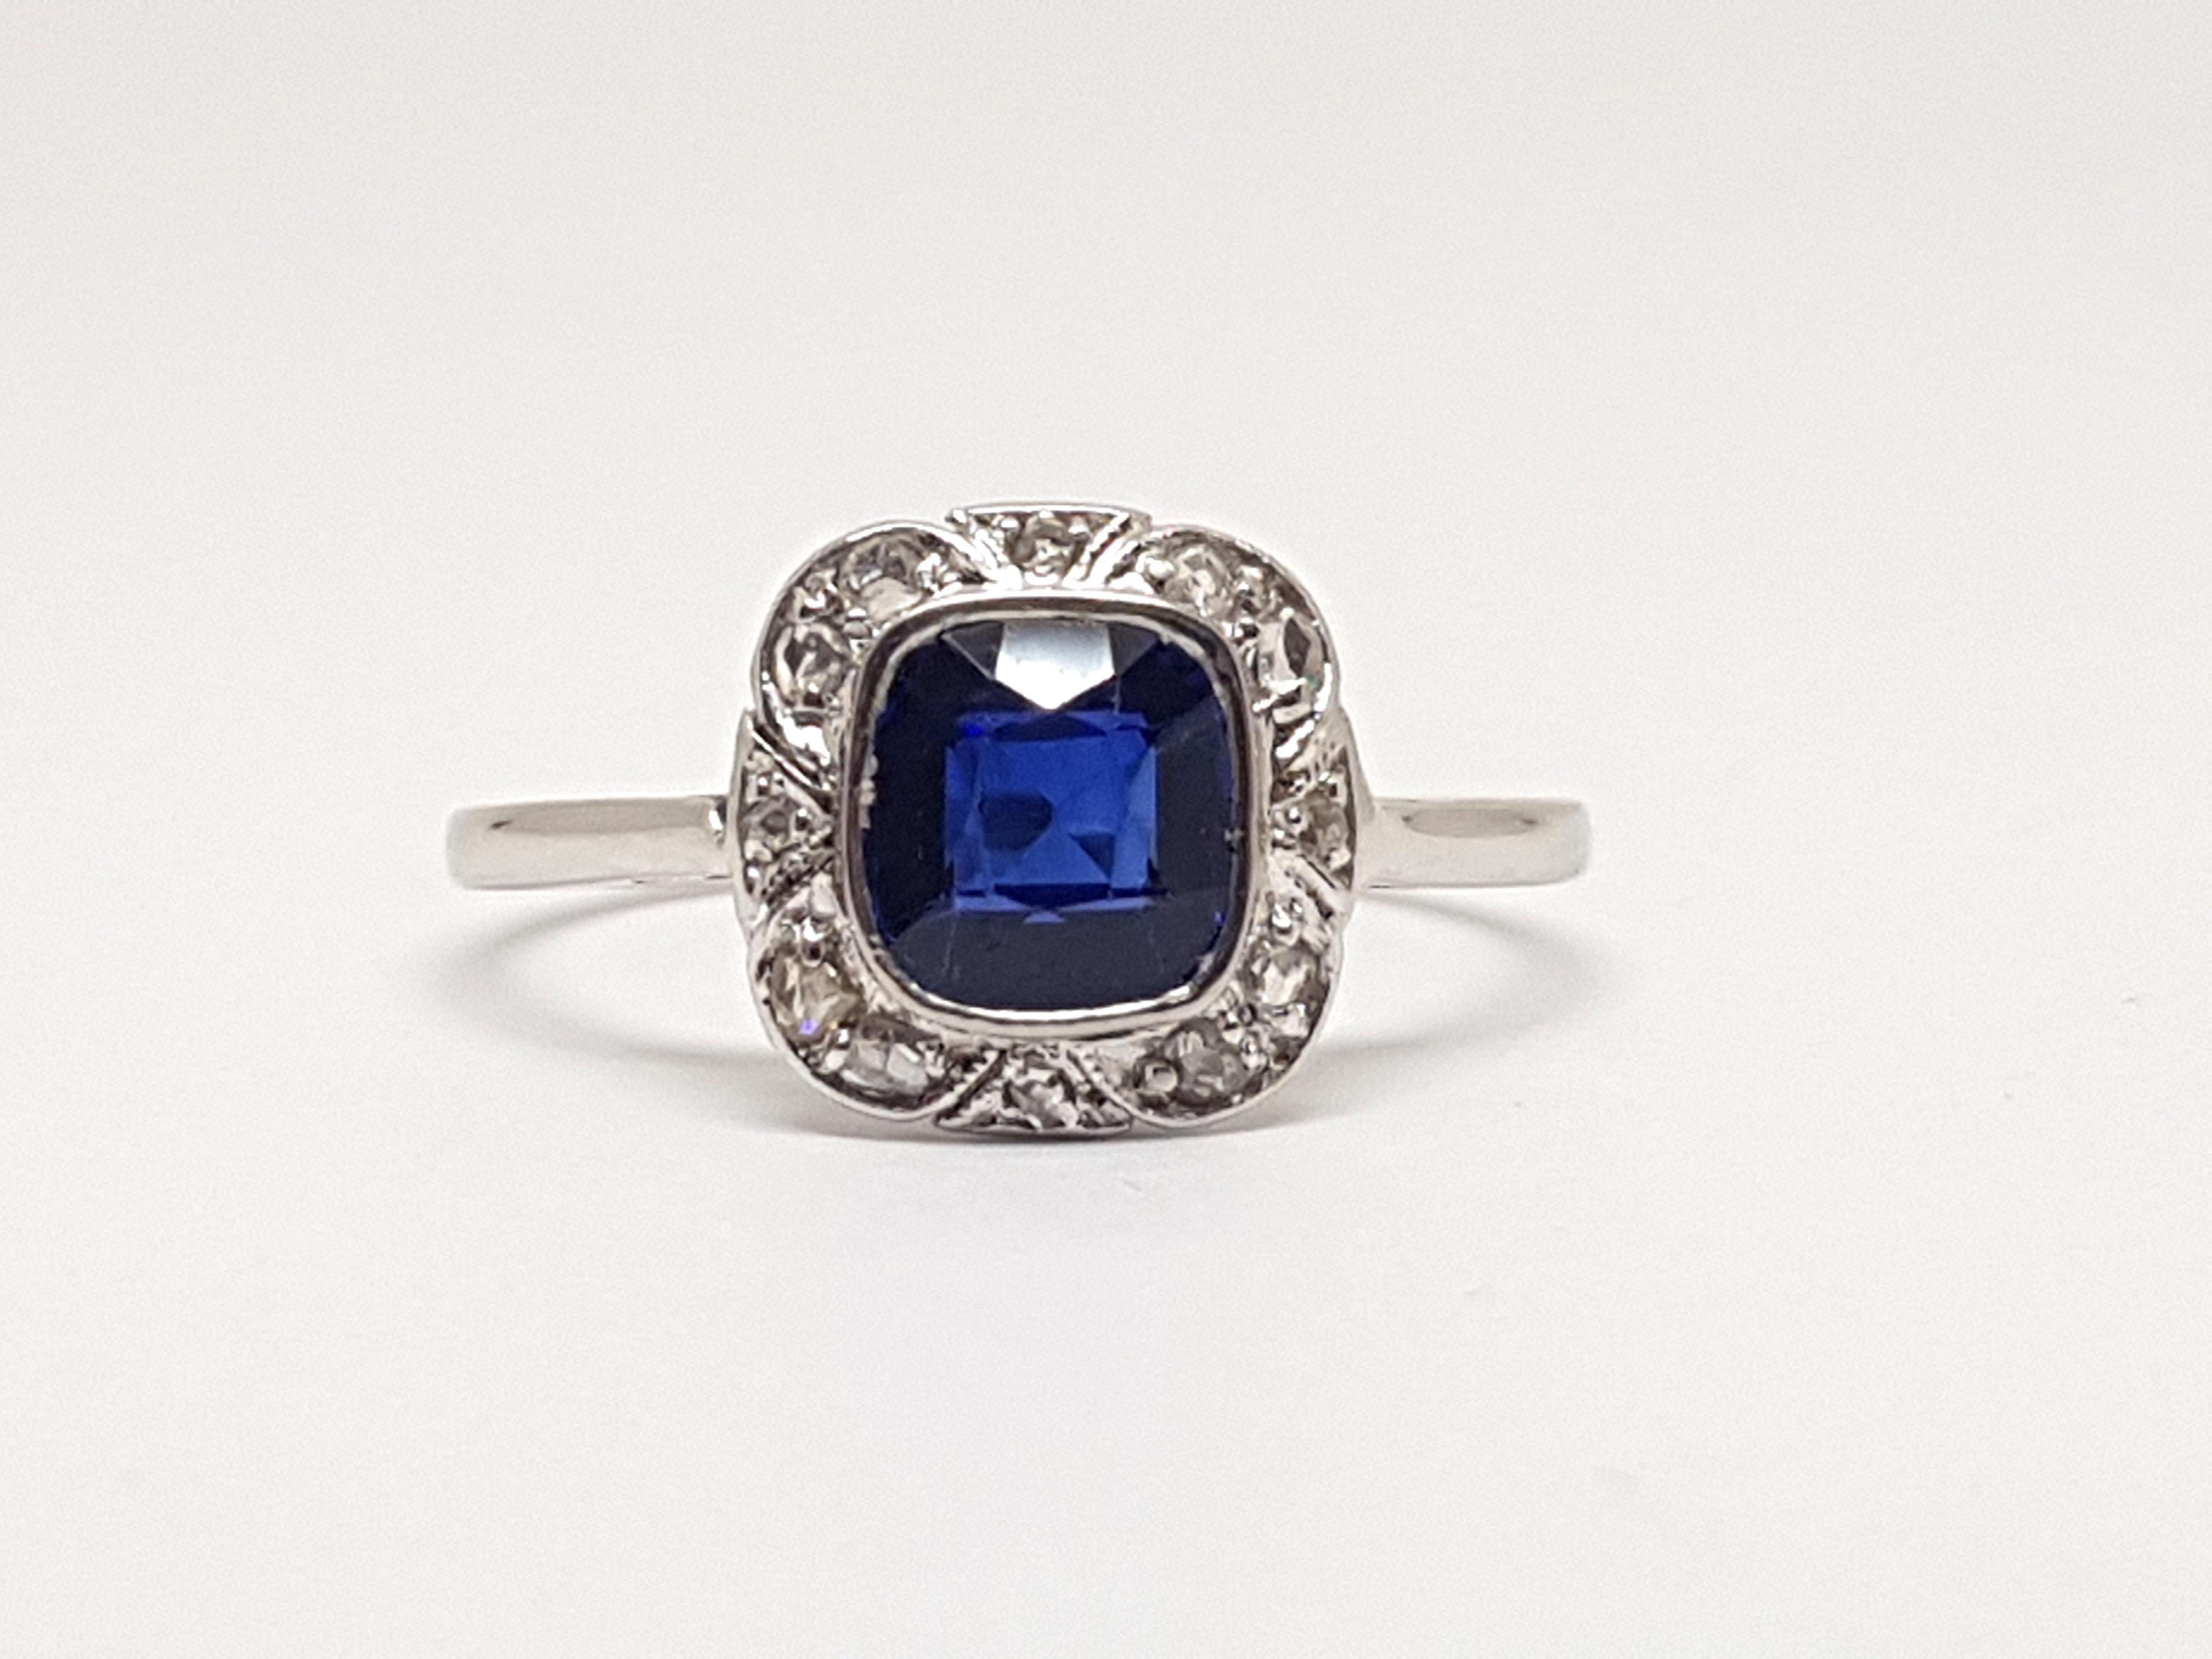 Contemporary 1.62 Carat White Gold Diamond Sapphire Ring For Sale